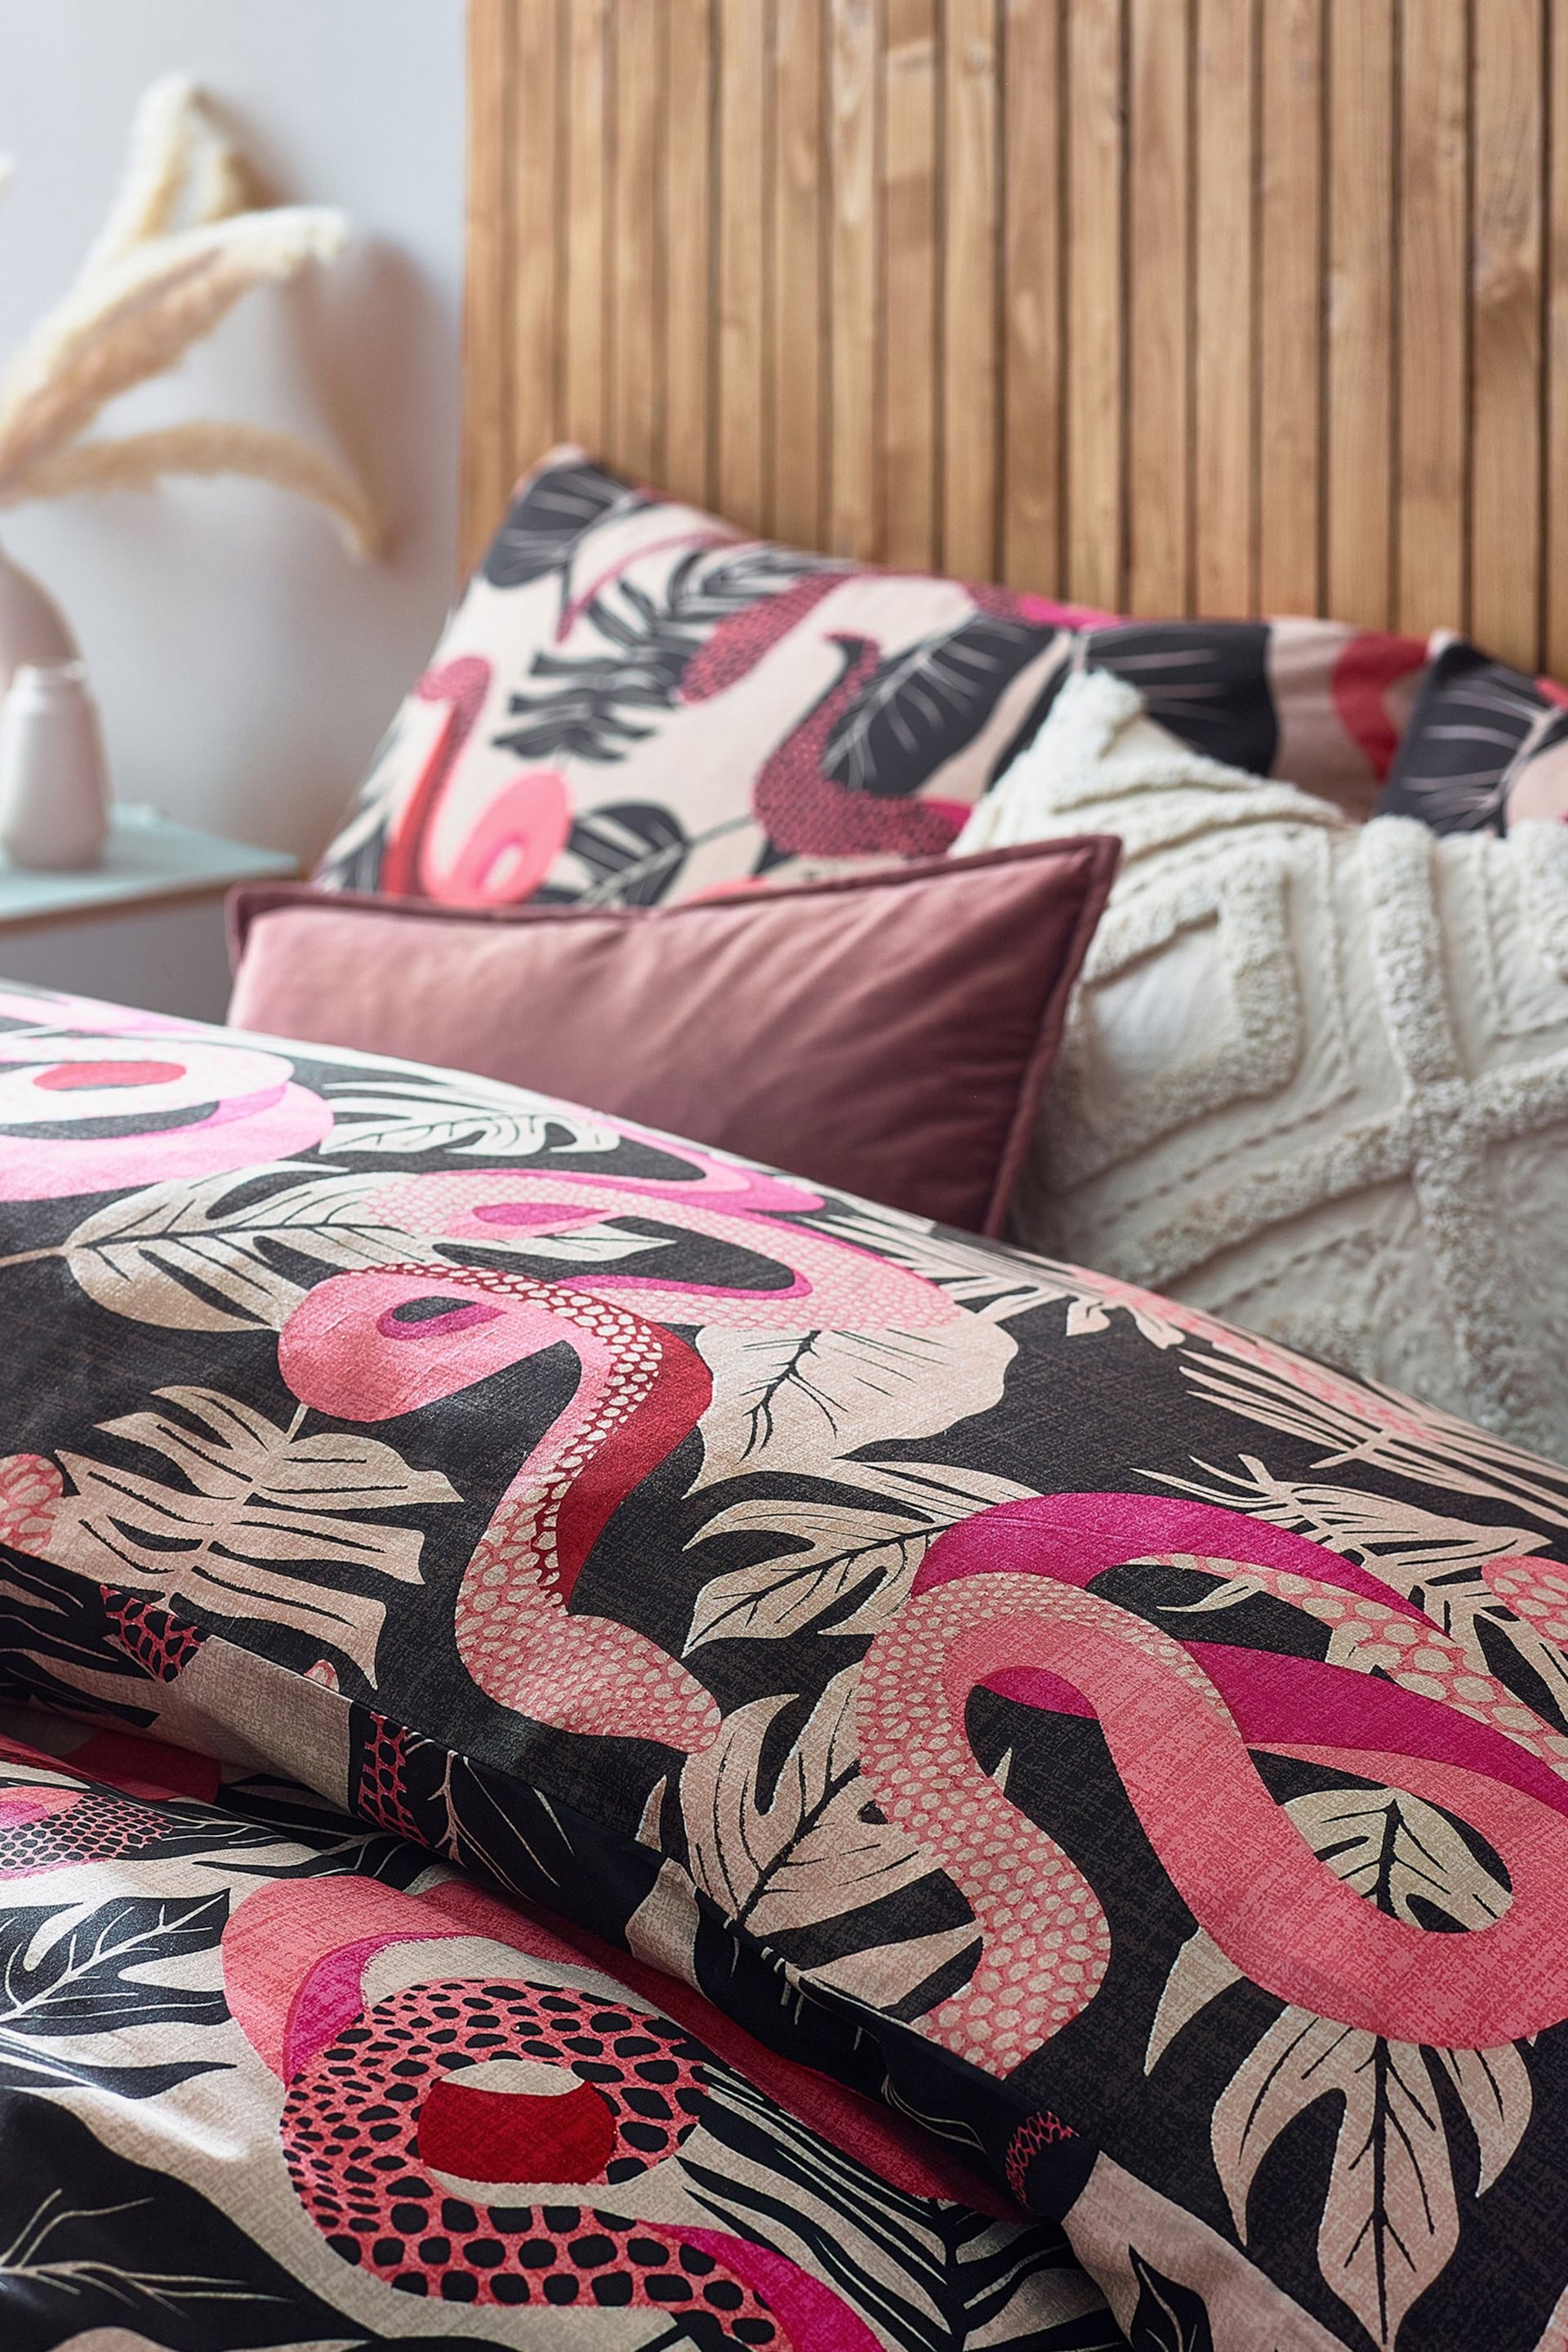 furn. Ruby Pink Serpentine Tropical Reversible Duvet Cover and Pillowcase Set - Image 2 of 3